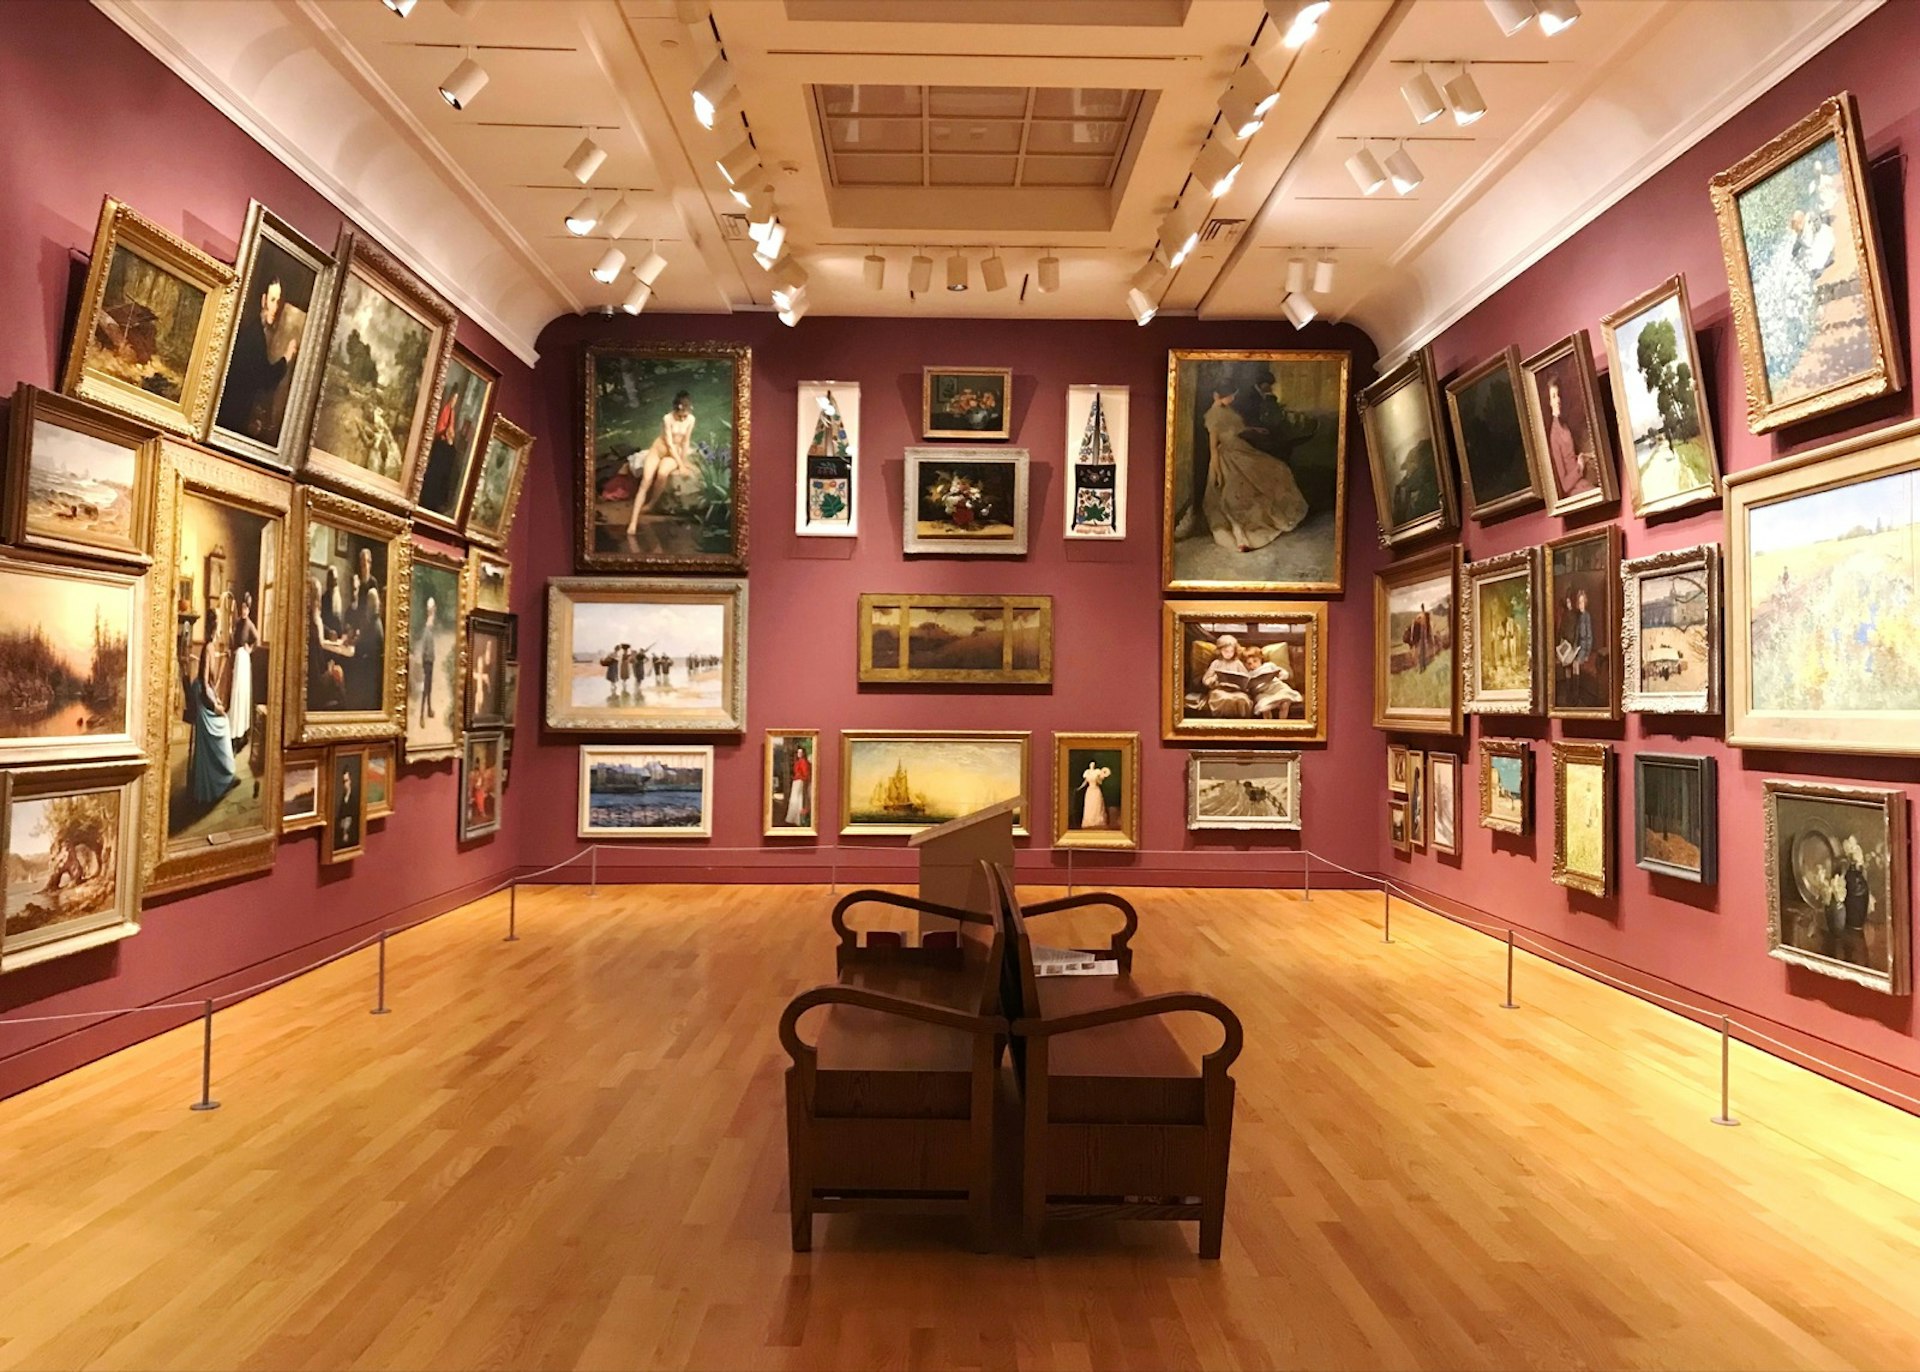 Rich maroon walls and blonde wood floors mark a museum gallery with dozens of framed artworks on every wall